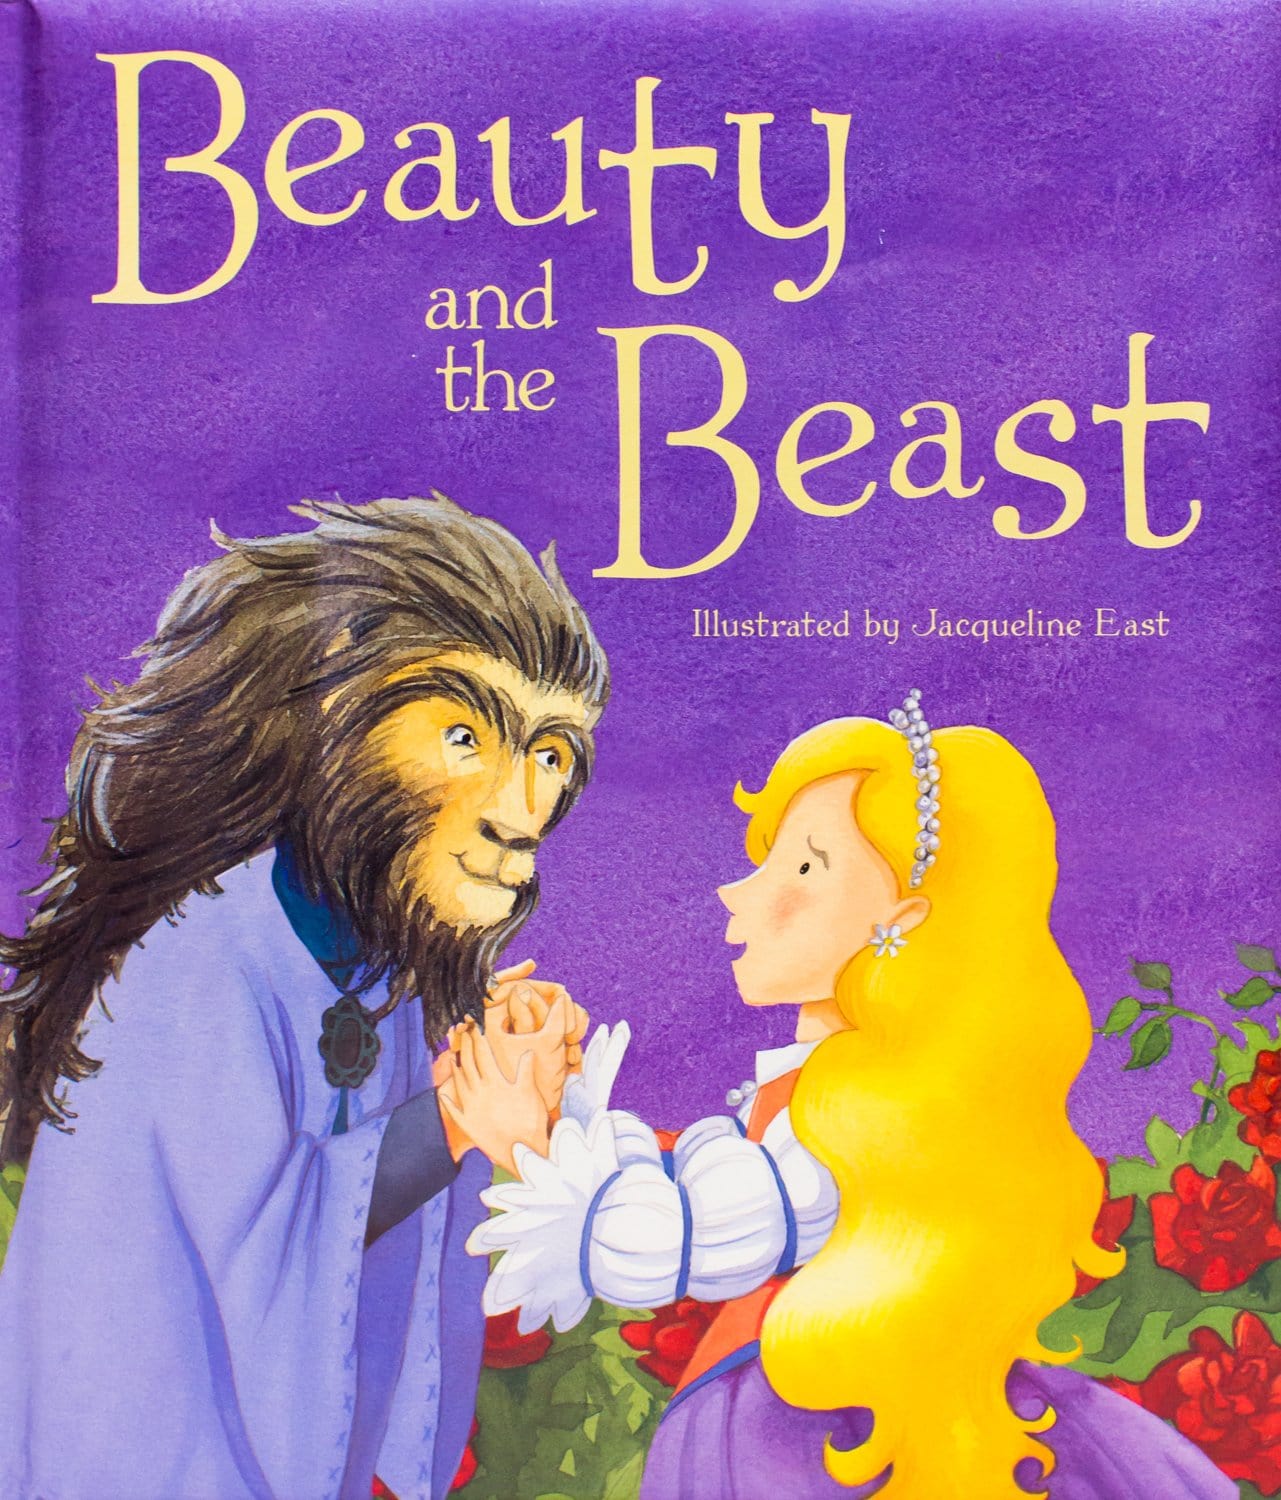 Beauty and the beast picture book